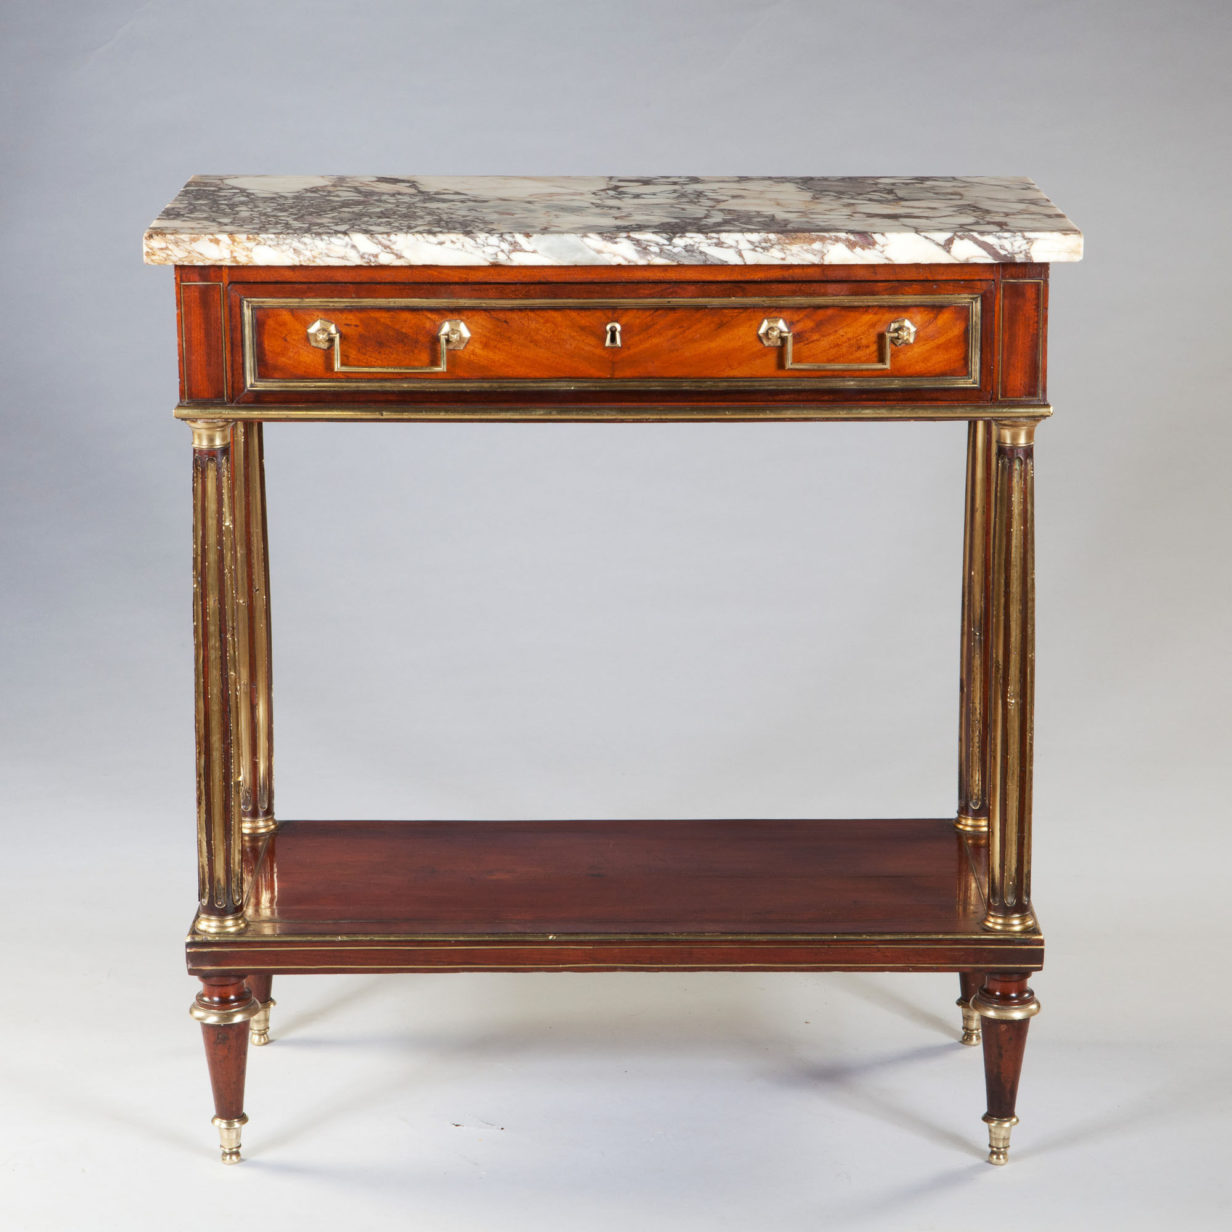 A late 18th century directoire period console table with breche violette marble top